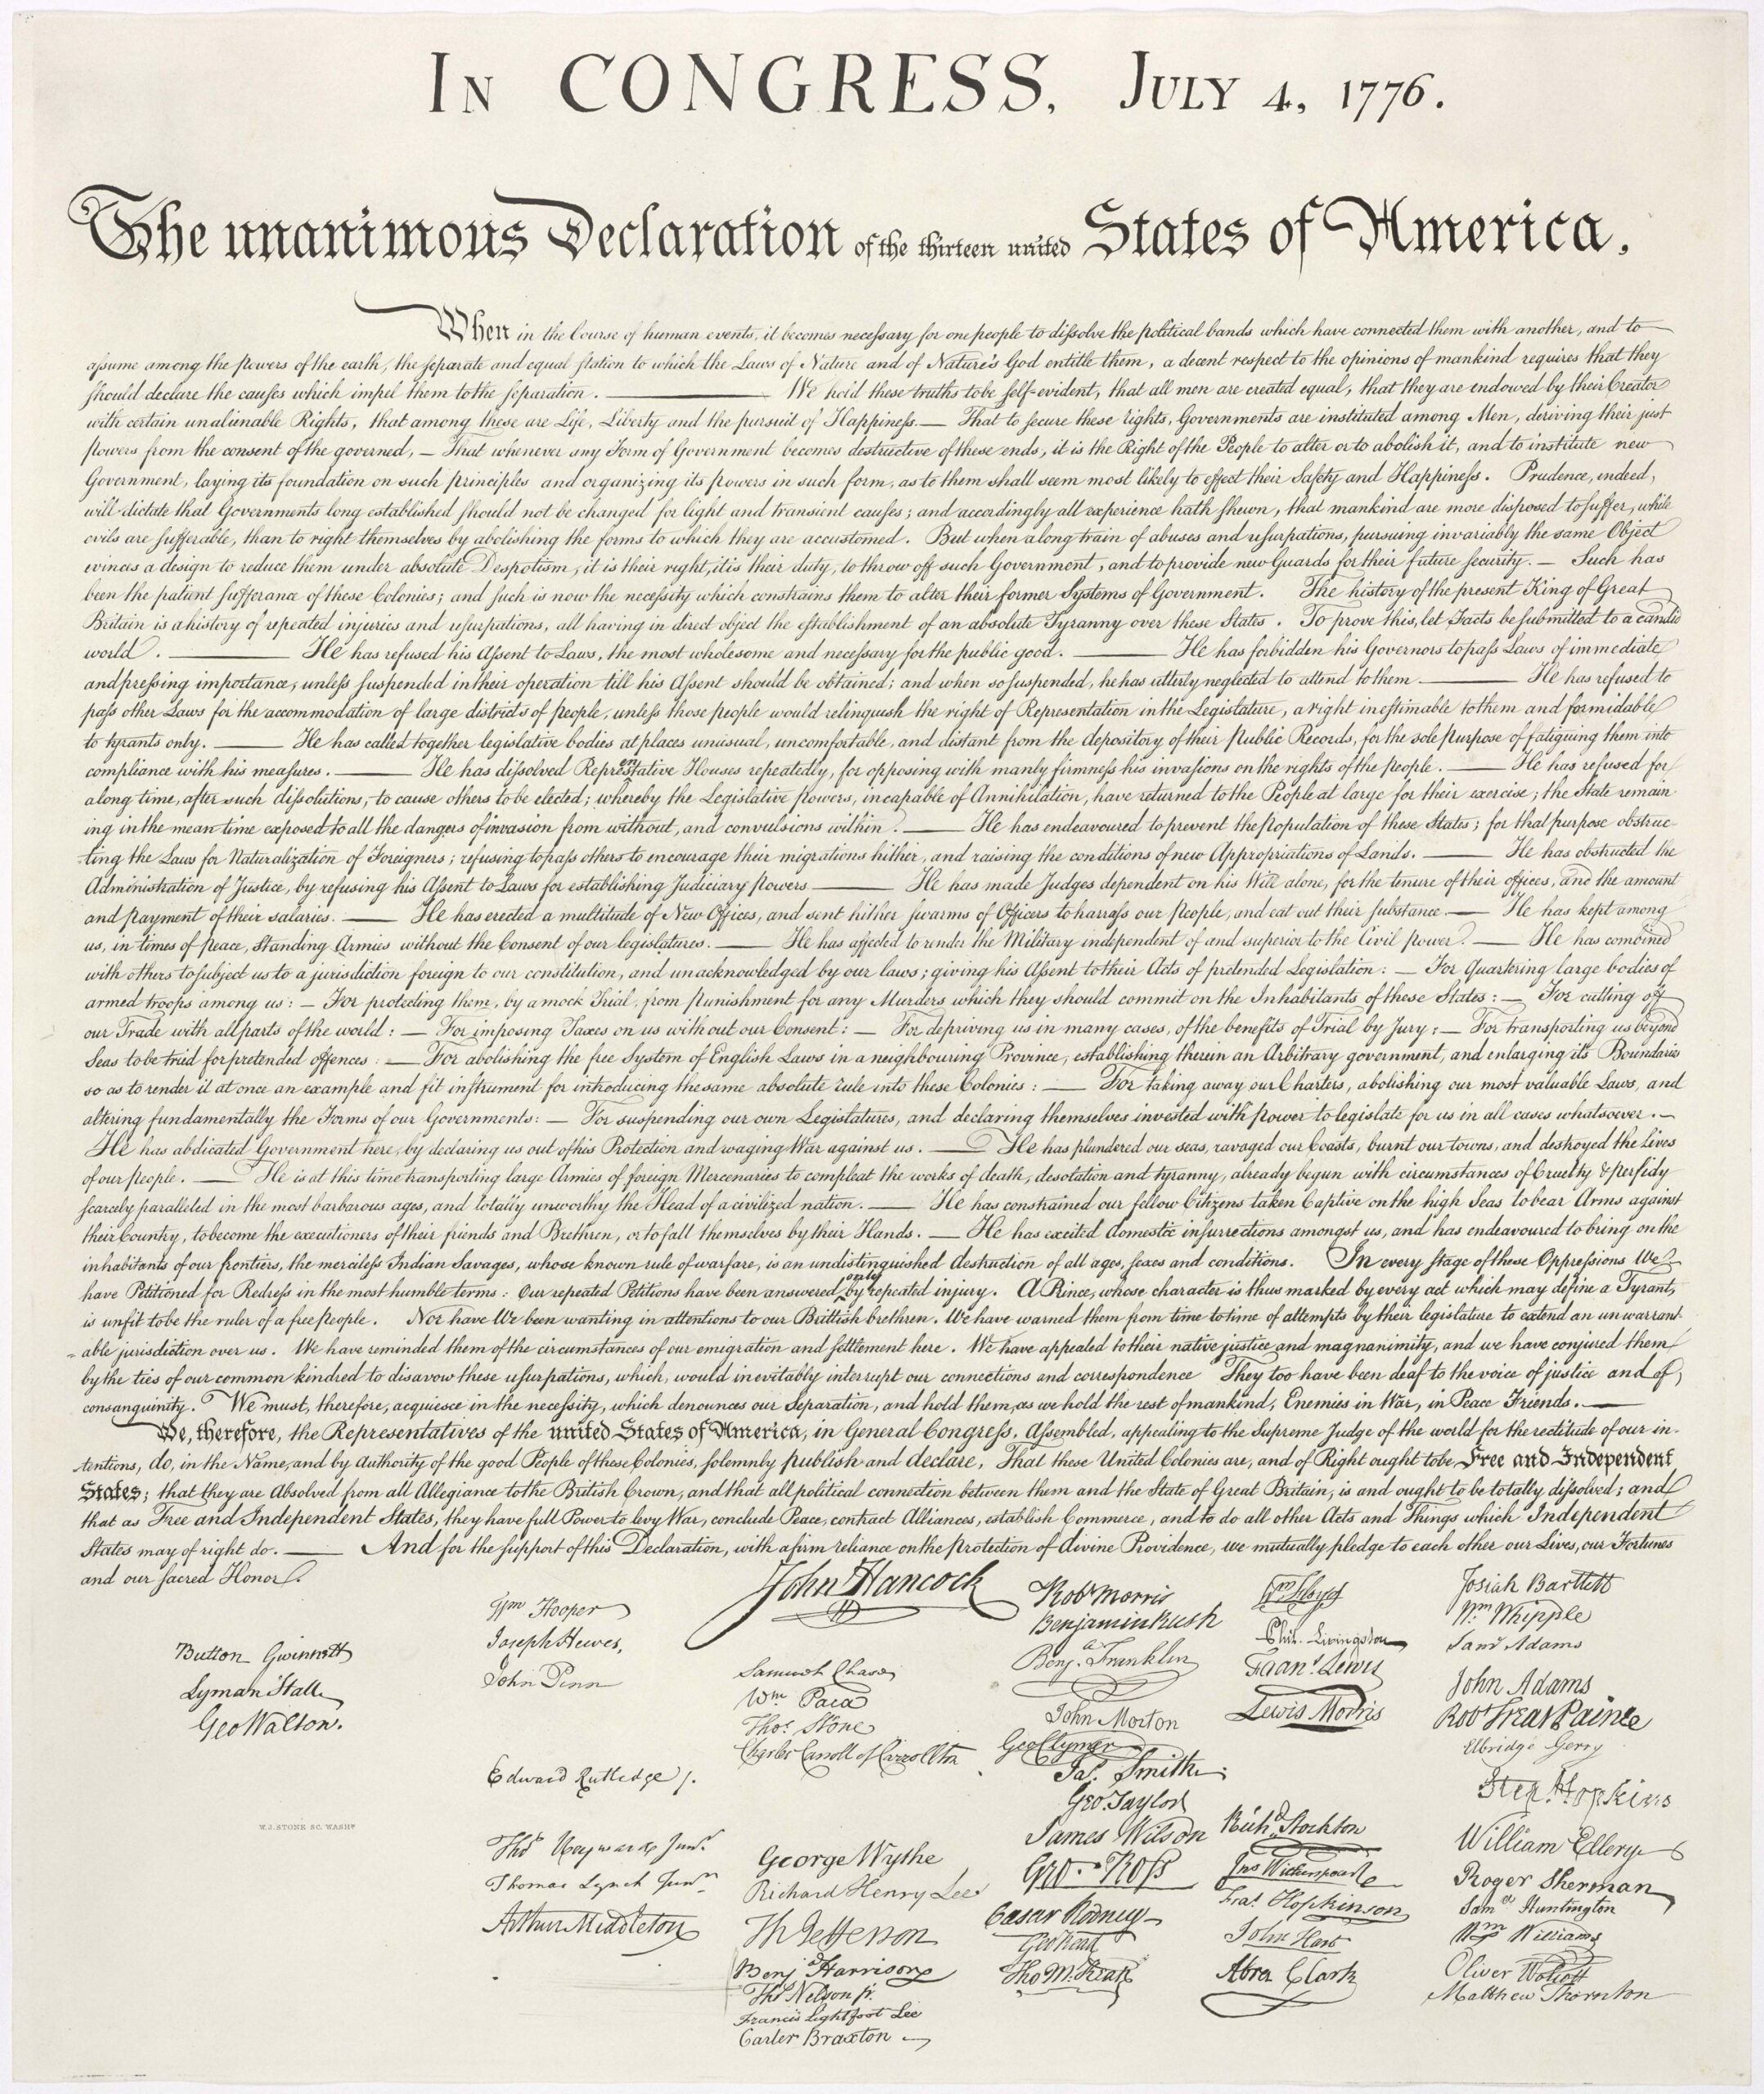 United States Declaration of Independence. Photo by: Wikimedia Commons